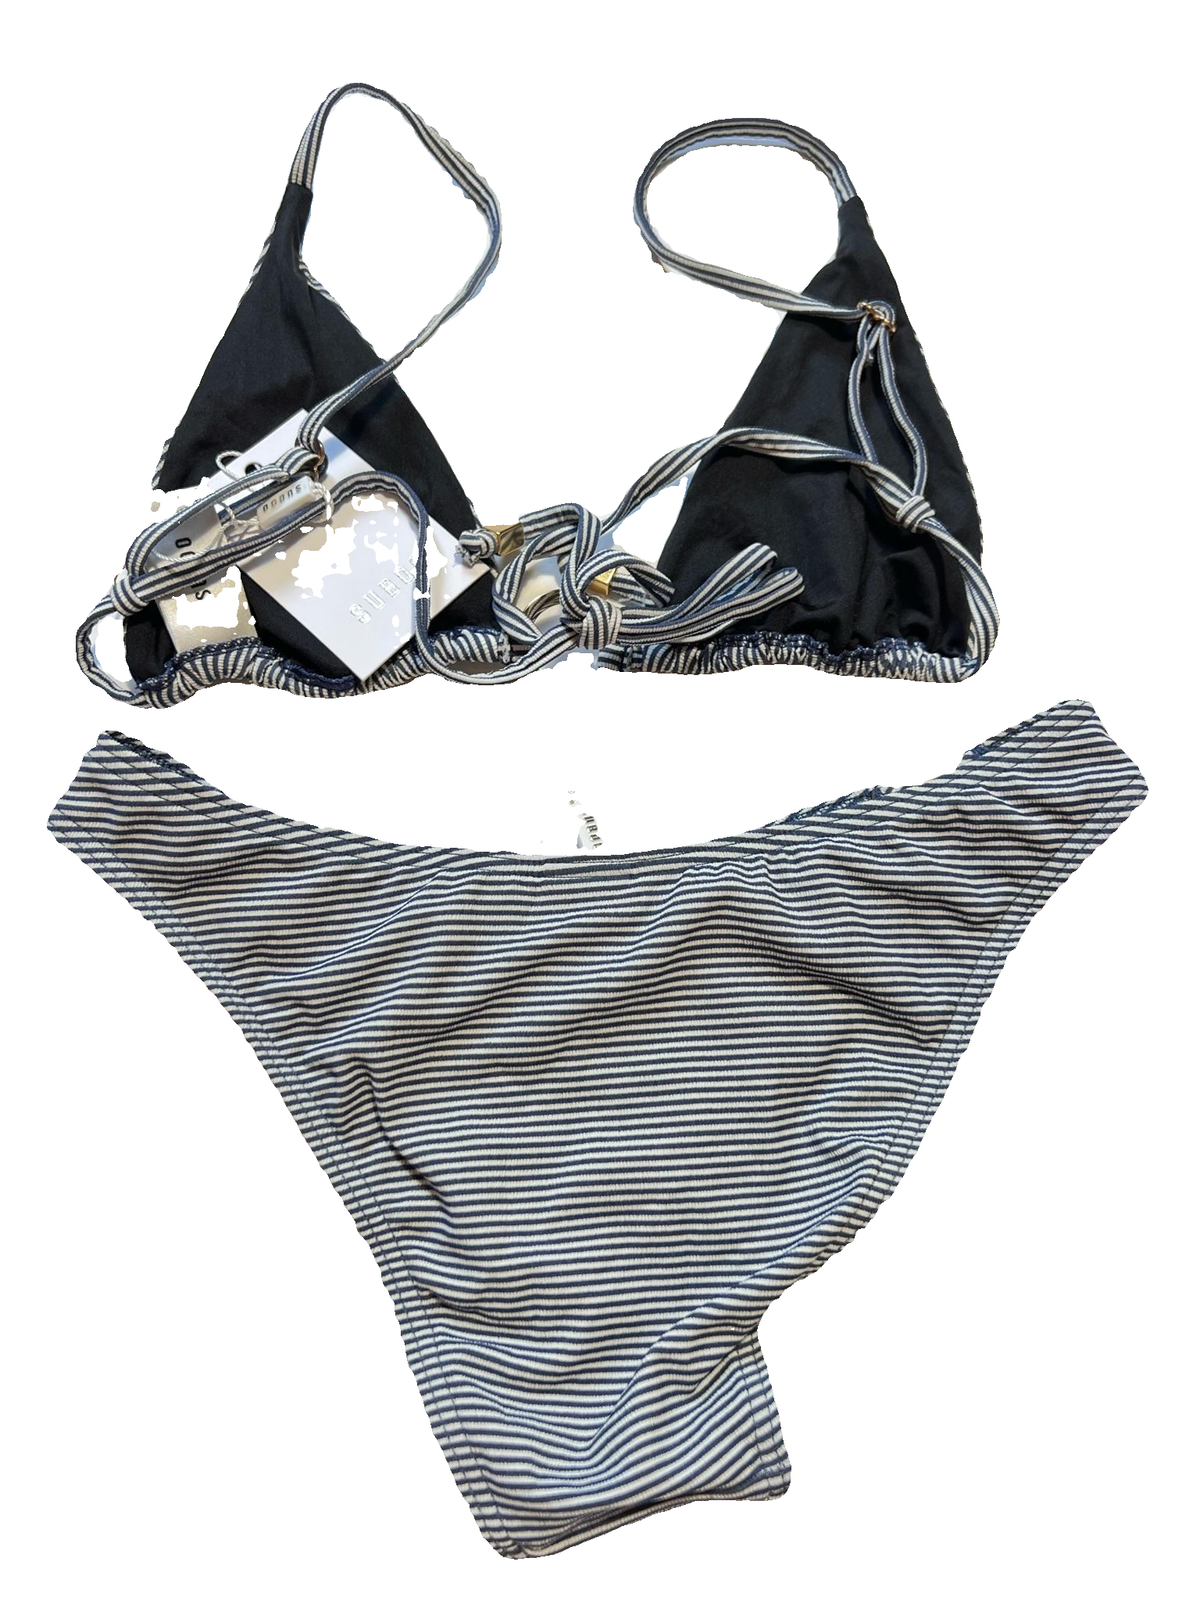 Suboo - Blue and White Bikini Set - NEW WITH TAGS